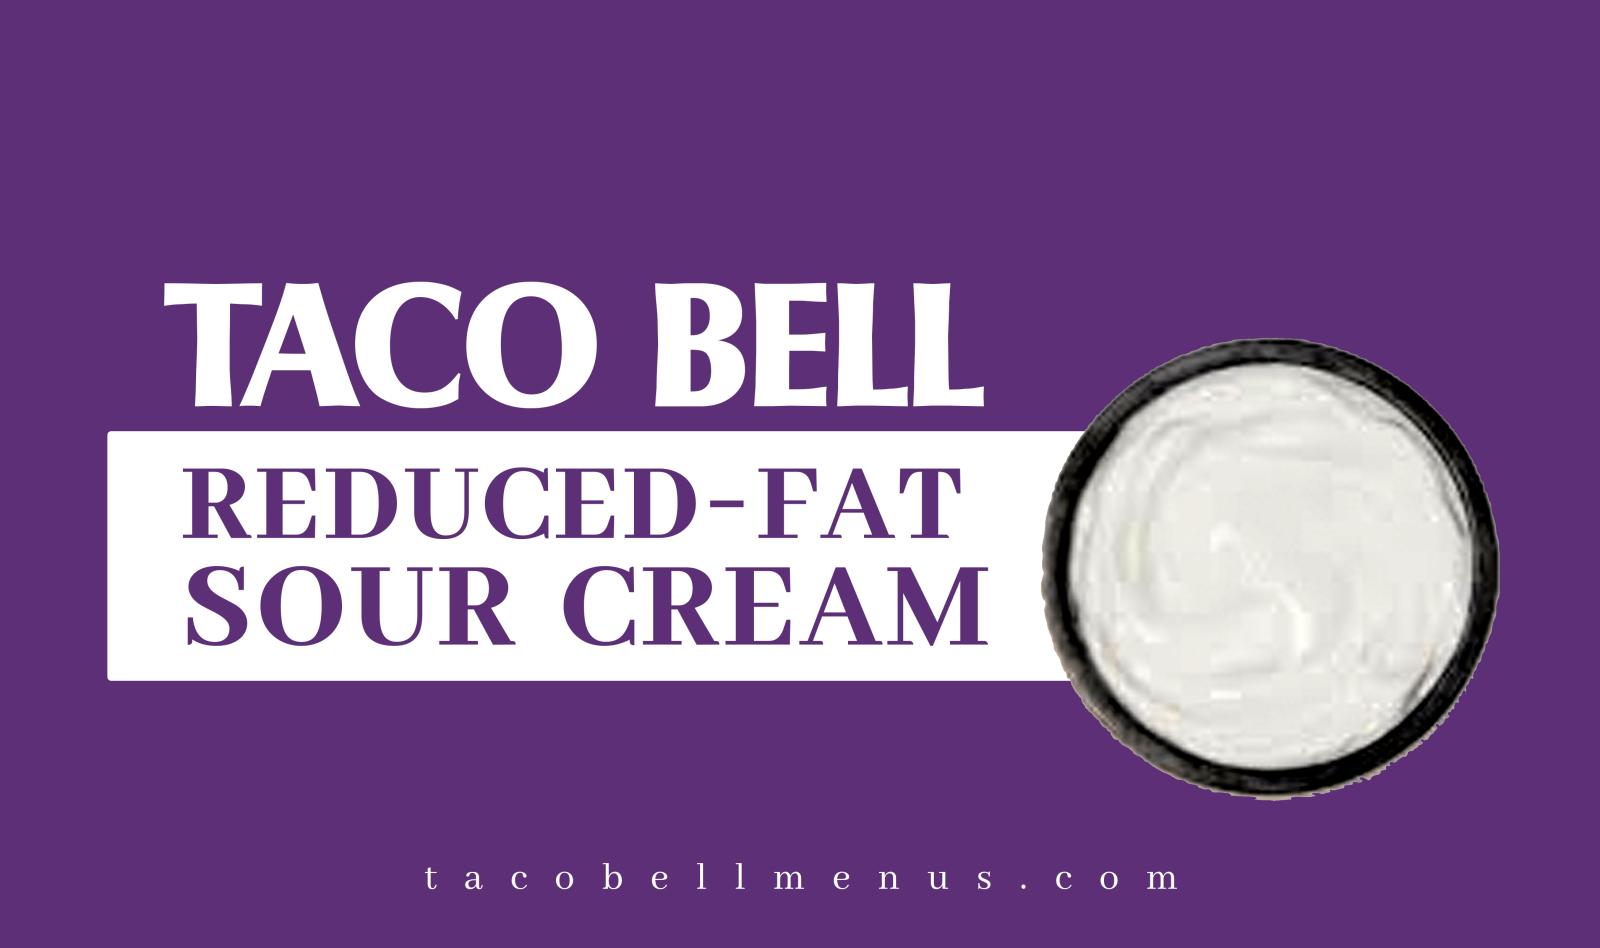 Taco Bell Reduced-Fat Sour Cream, Taco Bell Reduced-Fat Sour Cream Recipe, Taco Bell Reduced-Fat Sour Cream nutrition, Calories, Taco Bell Reduced-Fat Sour Cream price